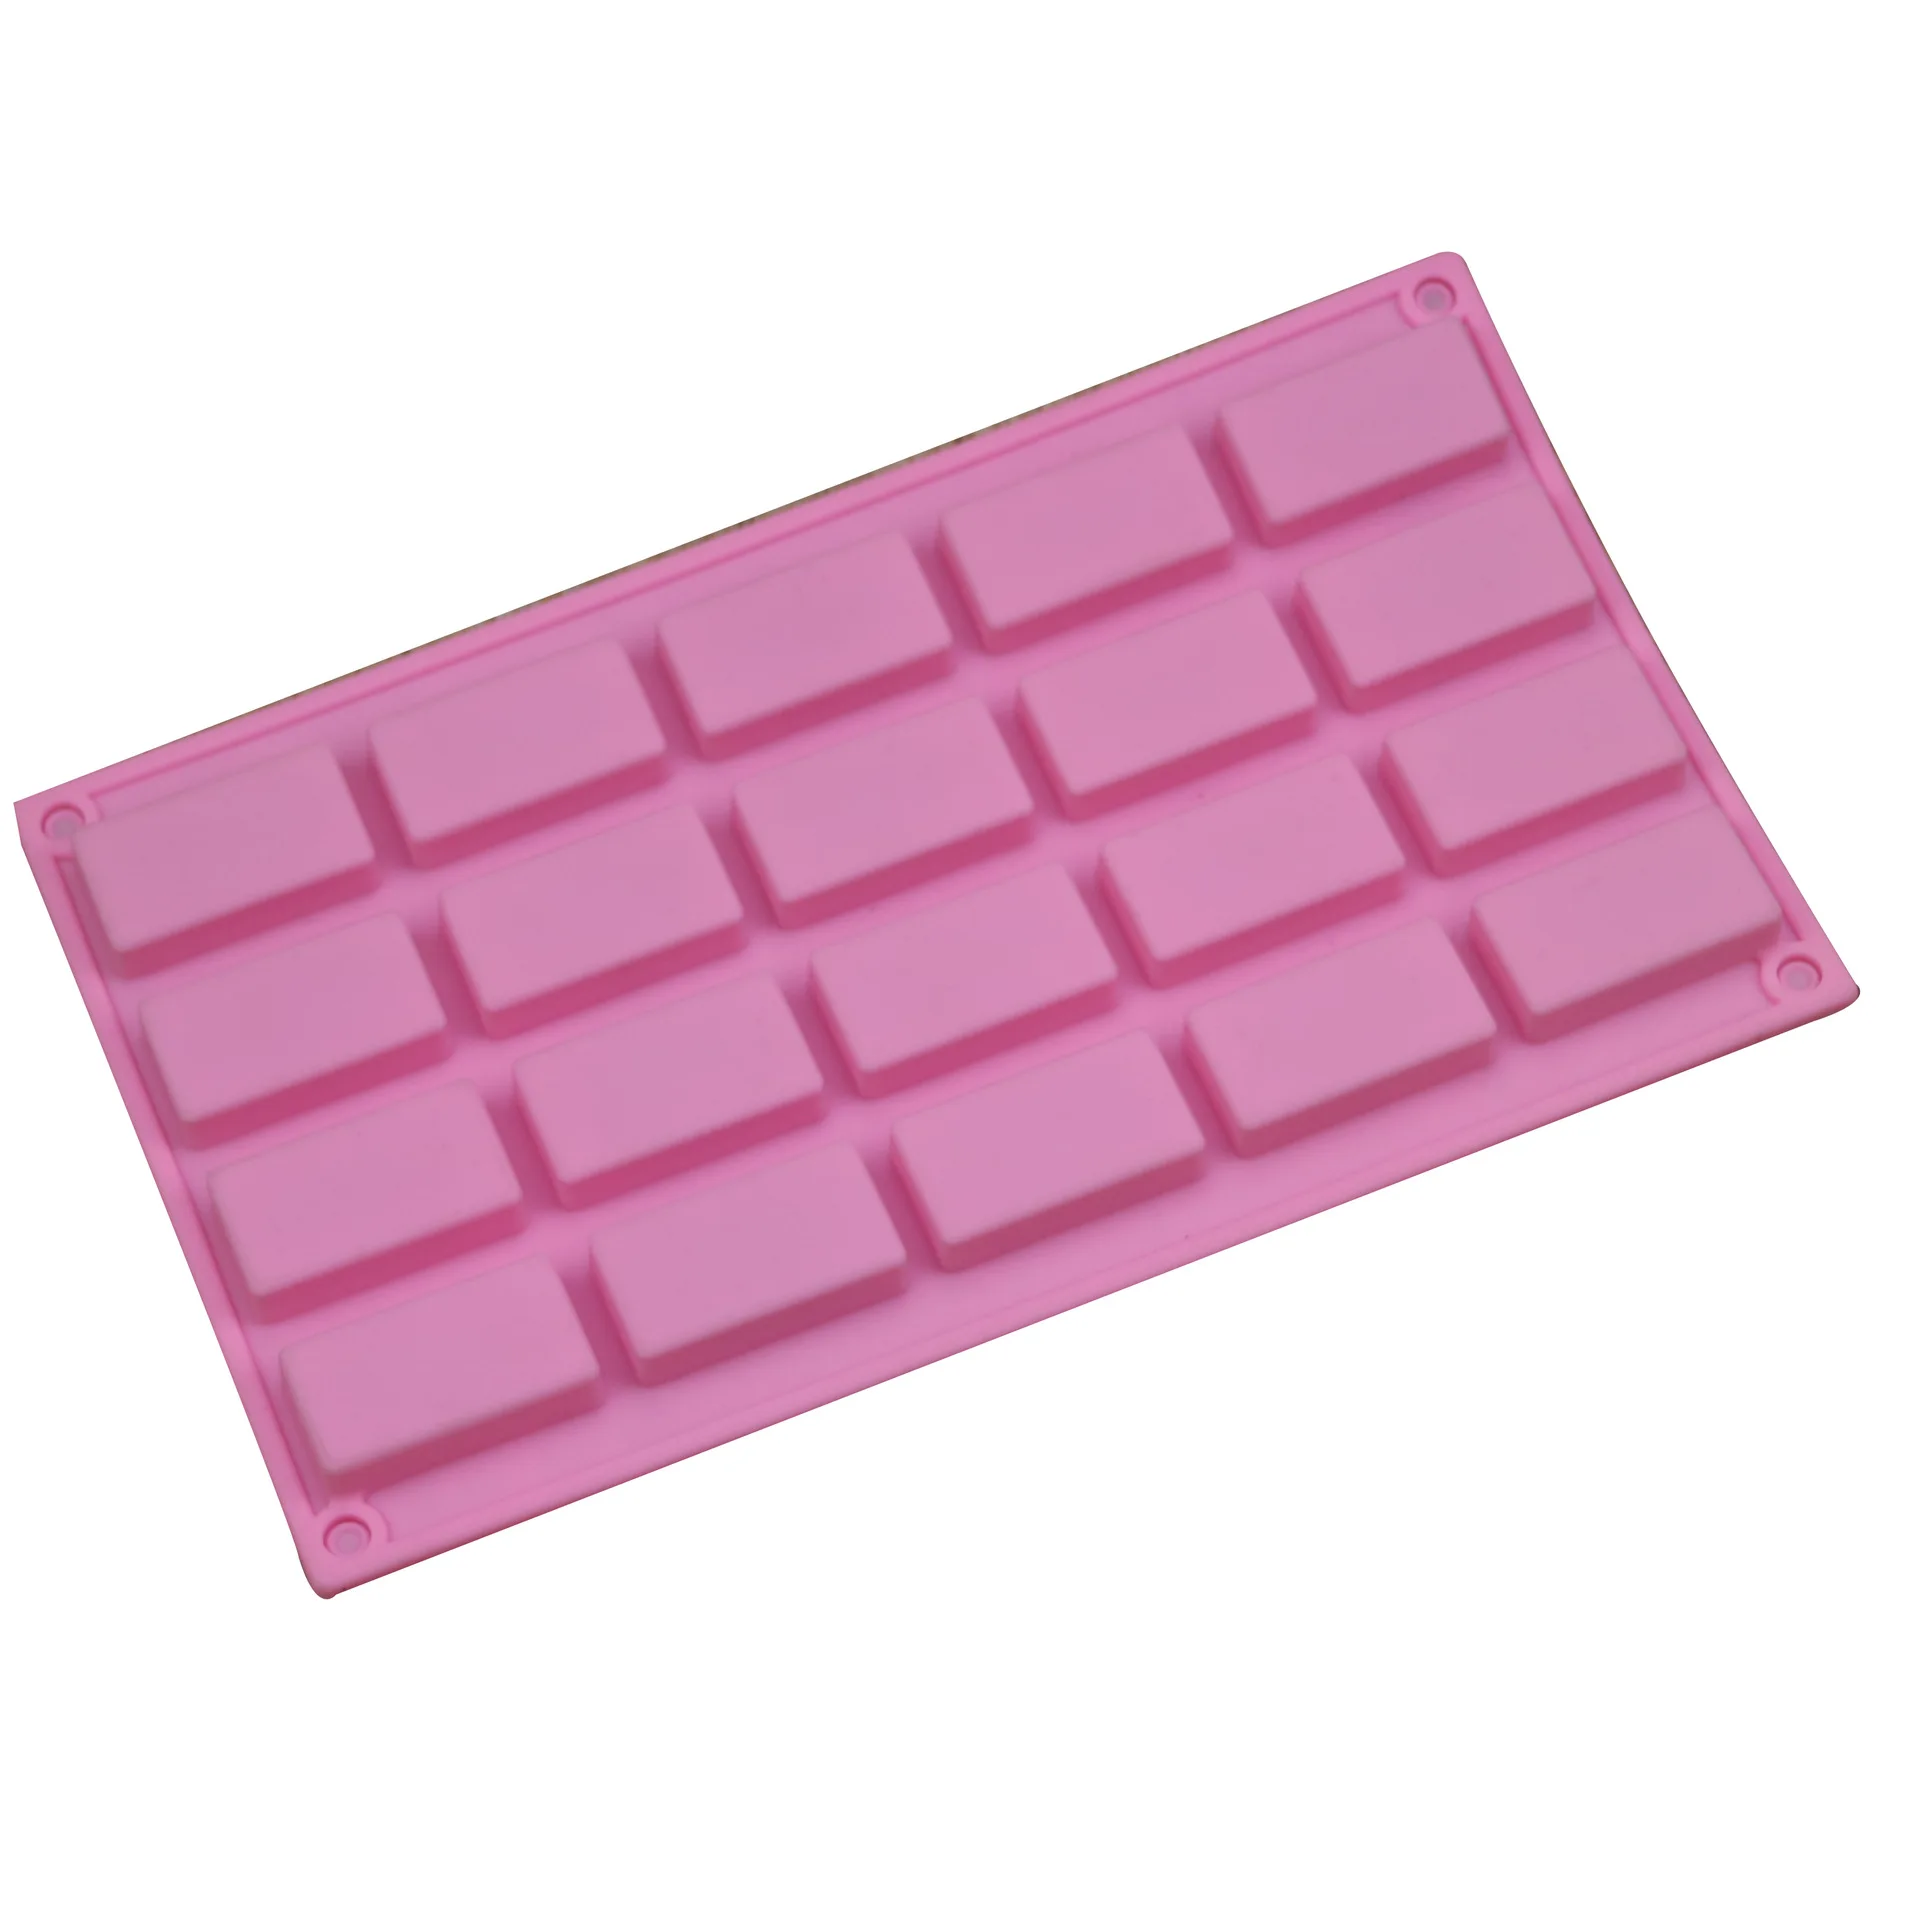 

1553 20 cavity rectangular chocolate cookie ice cube mold DIY baking tool soap silicone cake mold, Pink